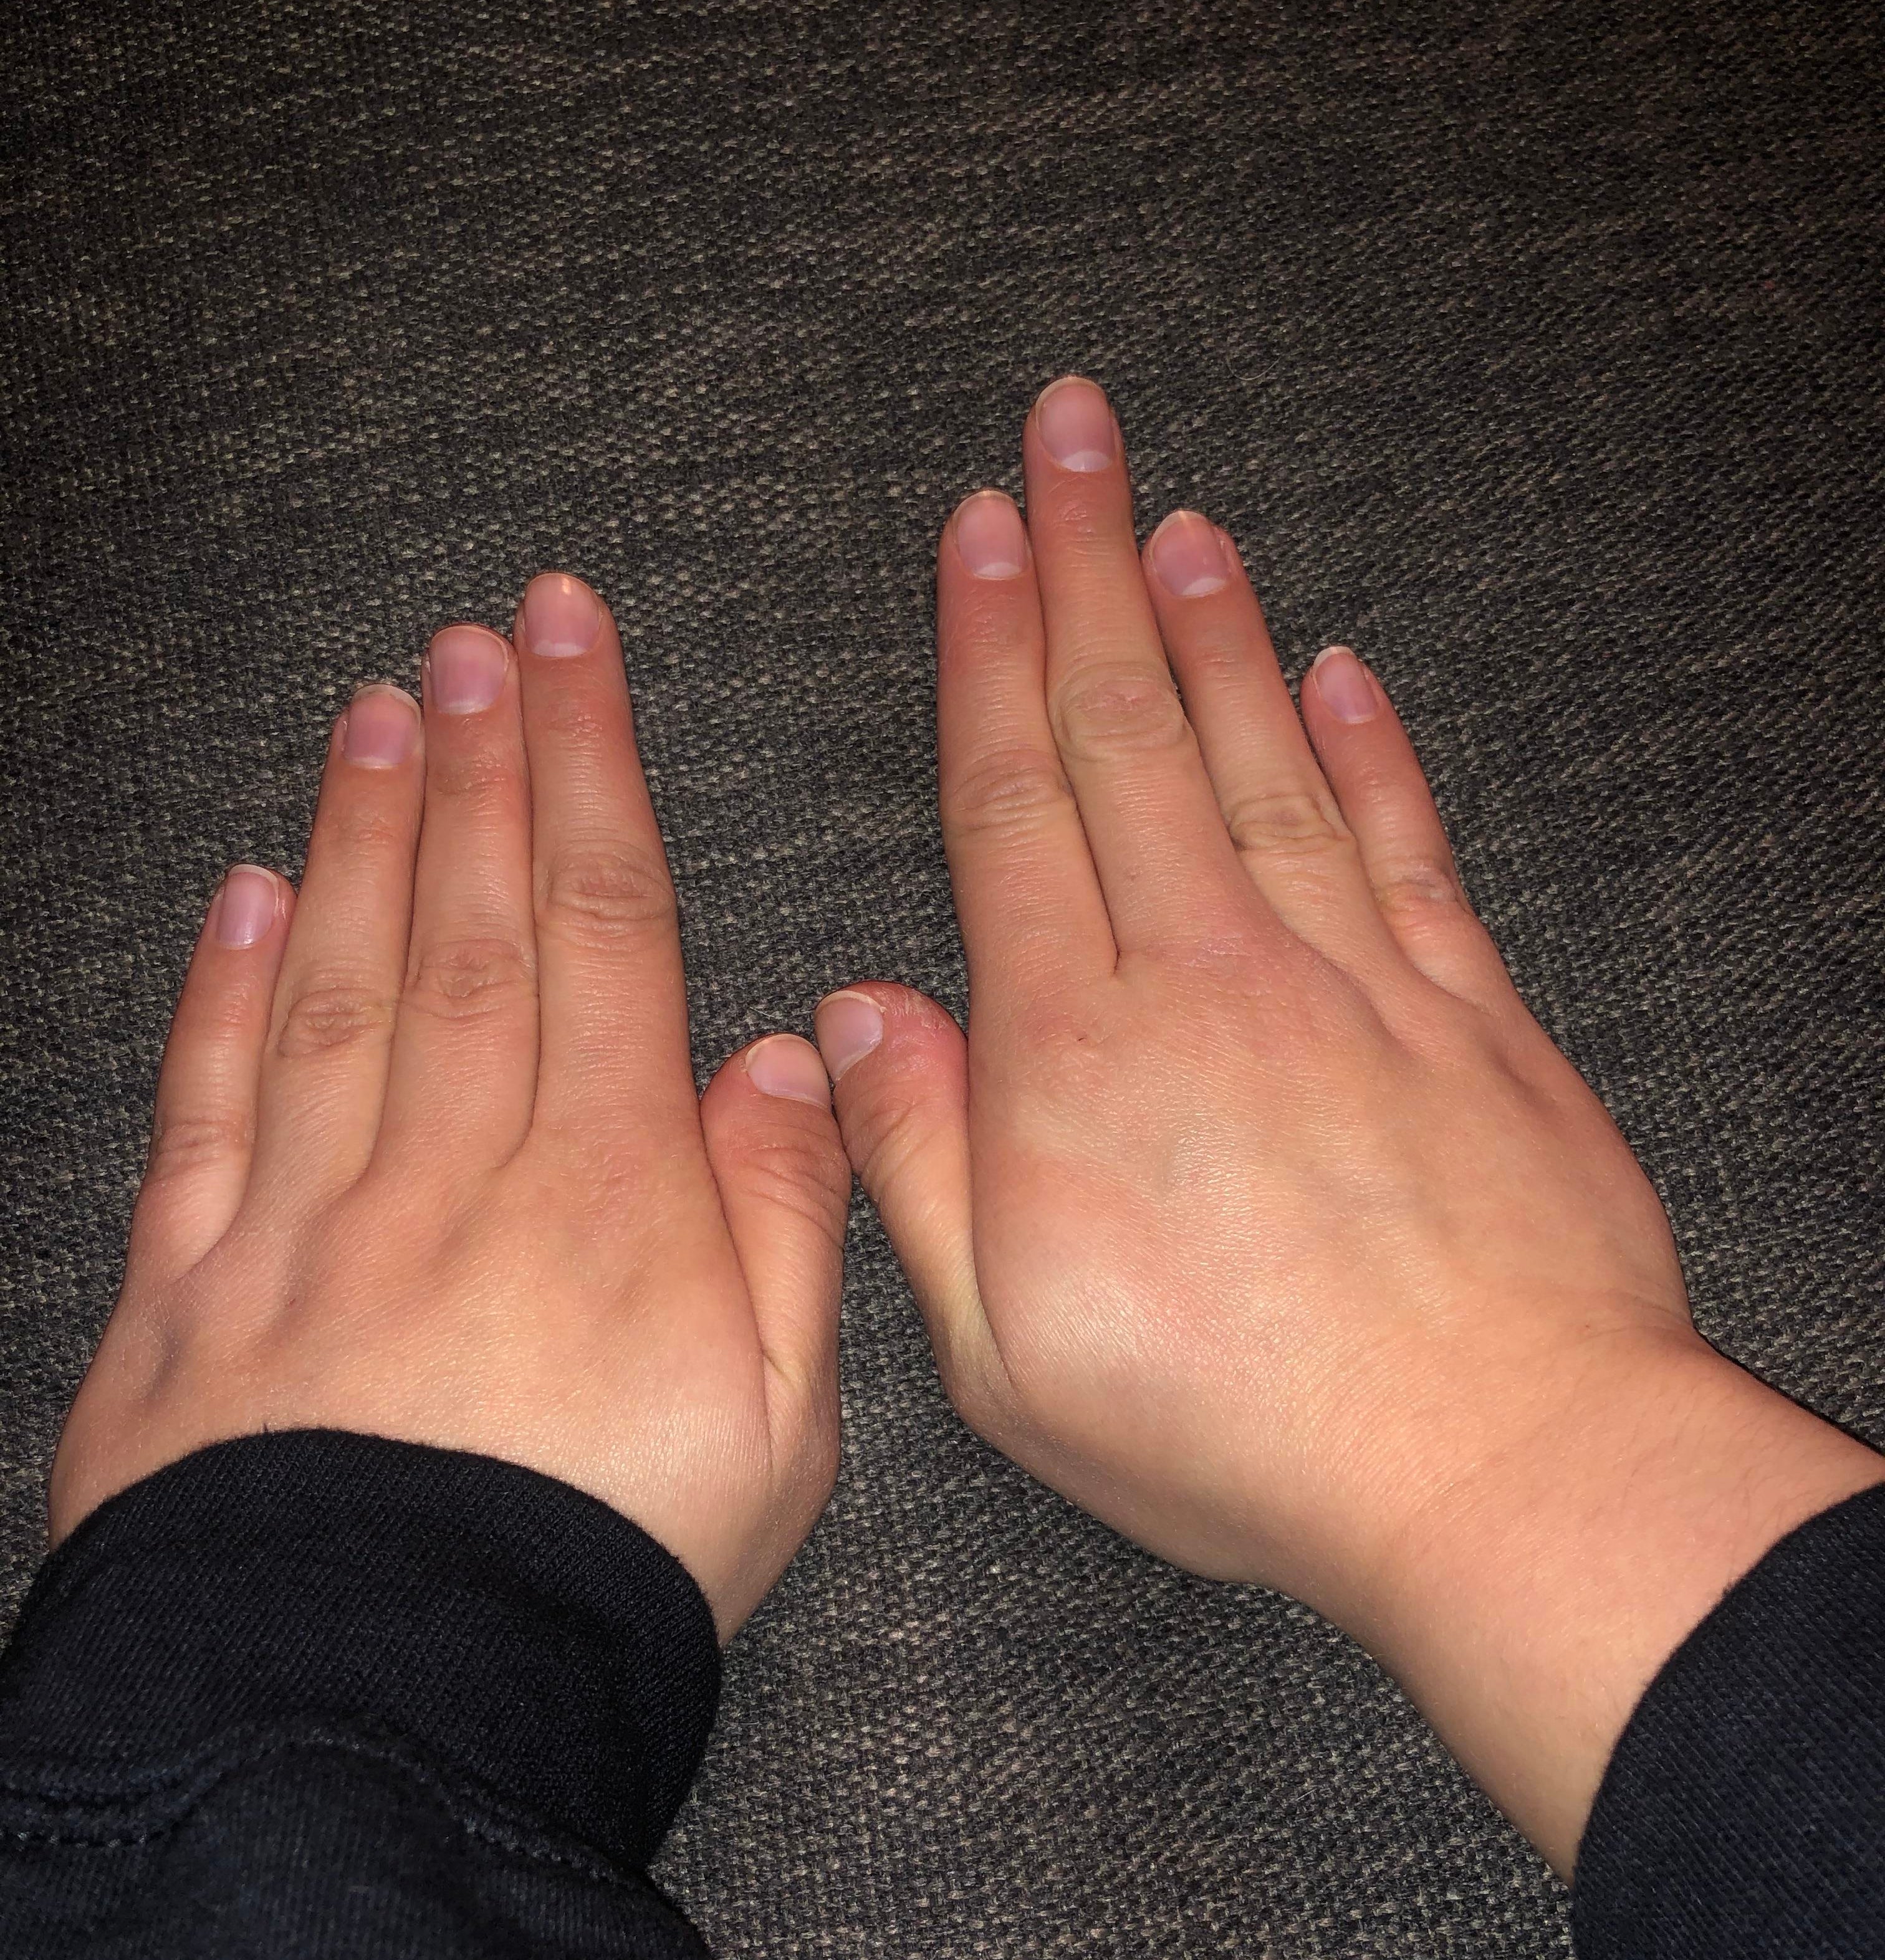 A person with two different sets of fingers